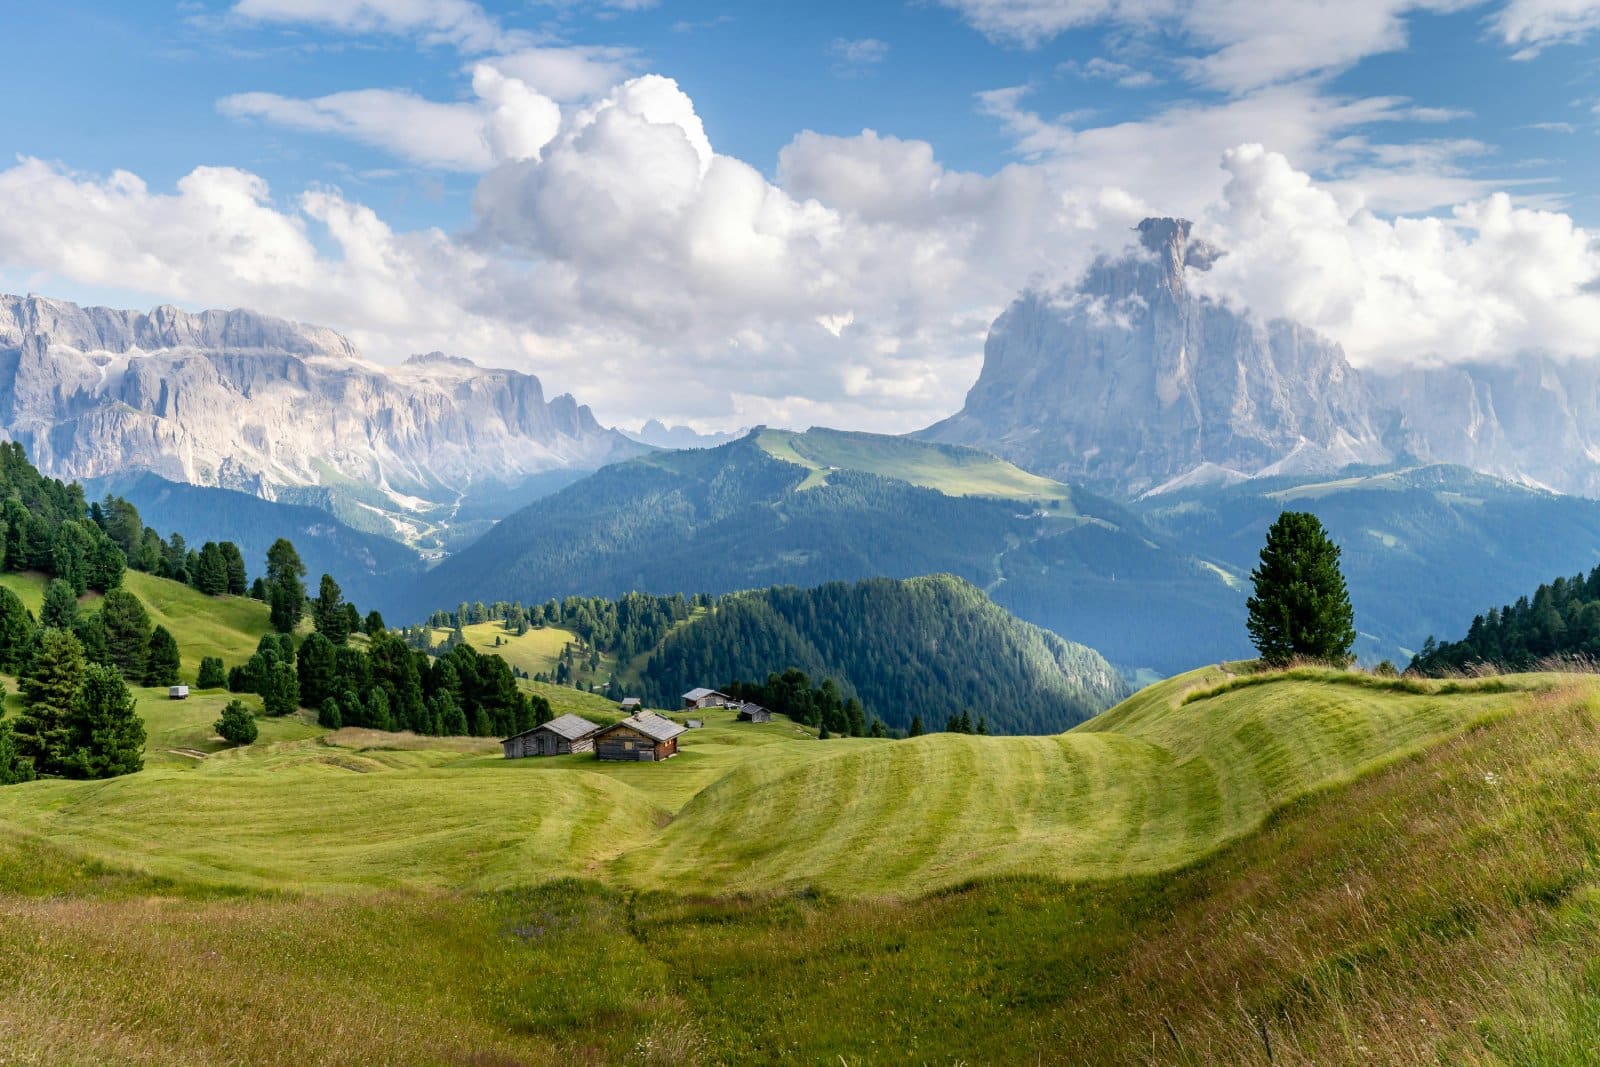 <p class="wp-caption-text">Image Credit: Pexels / Chavdar Lungov</p>  <p><span>Val Gardena is a valley in the Dolomites known for its rich Ladin culture, wood carving tradition, and as a world-class skiing destination. The valley, with its three picturesque towns of Ortisei, Santa Cristina, and Selva, serves as a gateway to the expansive Dolomiti Superski area and the Sella Ronda ski circuit. In summer, Val Gardena transforms into a hiker’s paradise, with trails leading through lush meadows and dense forests, beneath towering rock faces.</span></p>